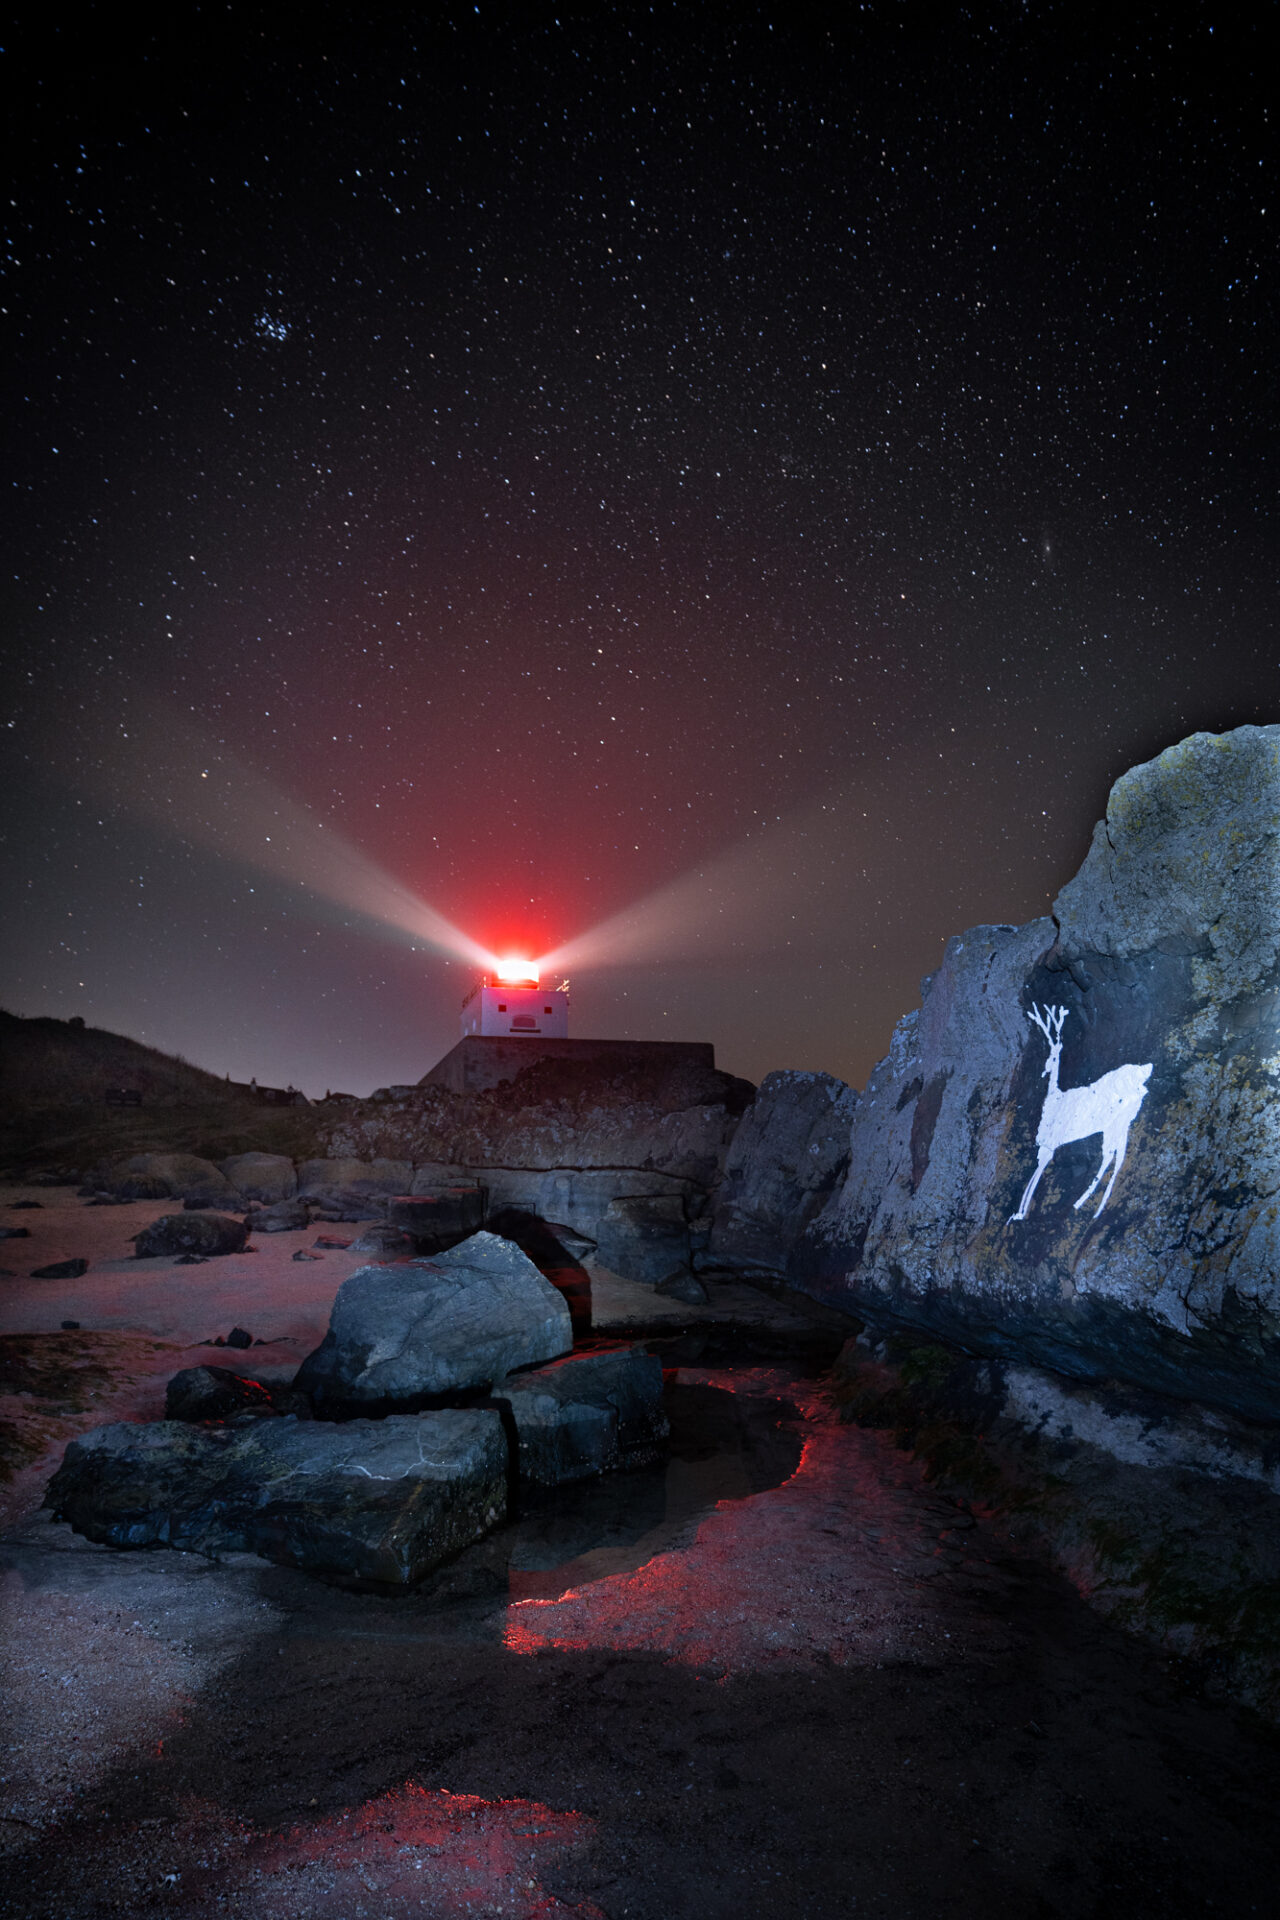 A white stag is drawn onto a rock. The night sky above is illuminated by a red beacon shining from a lighthouse style building.